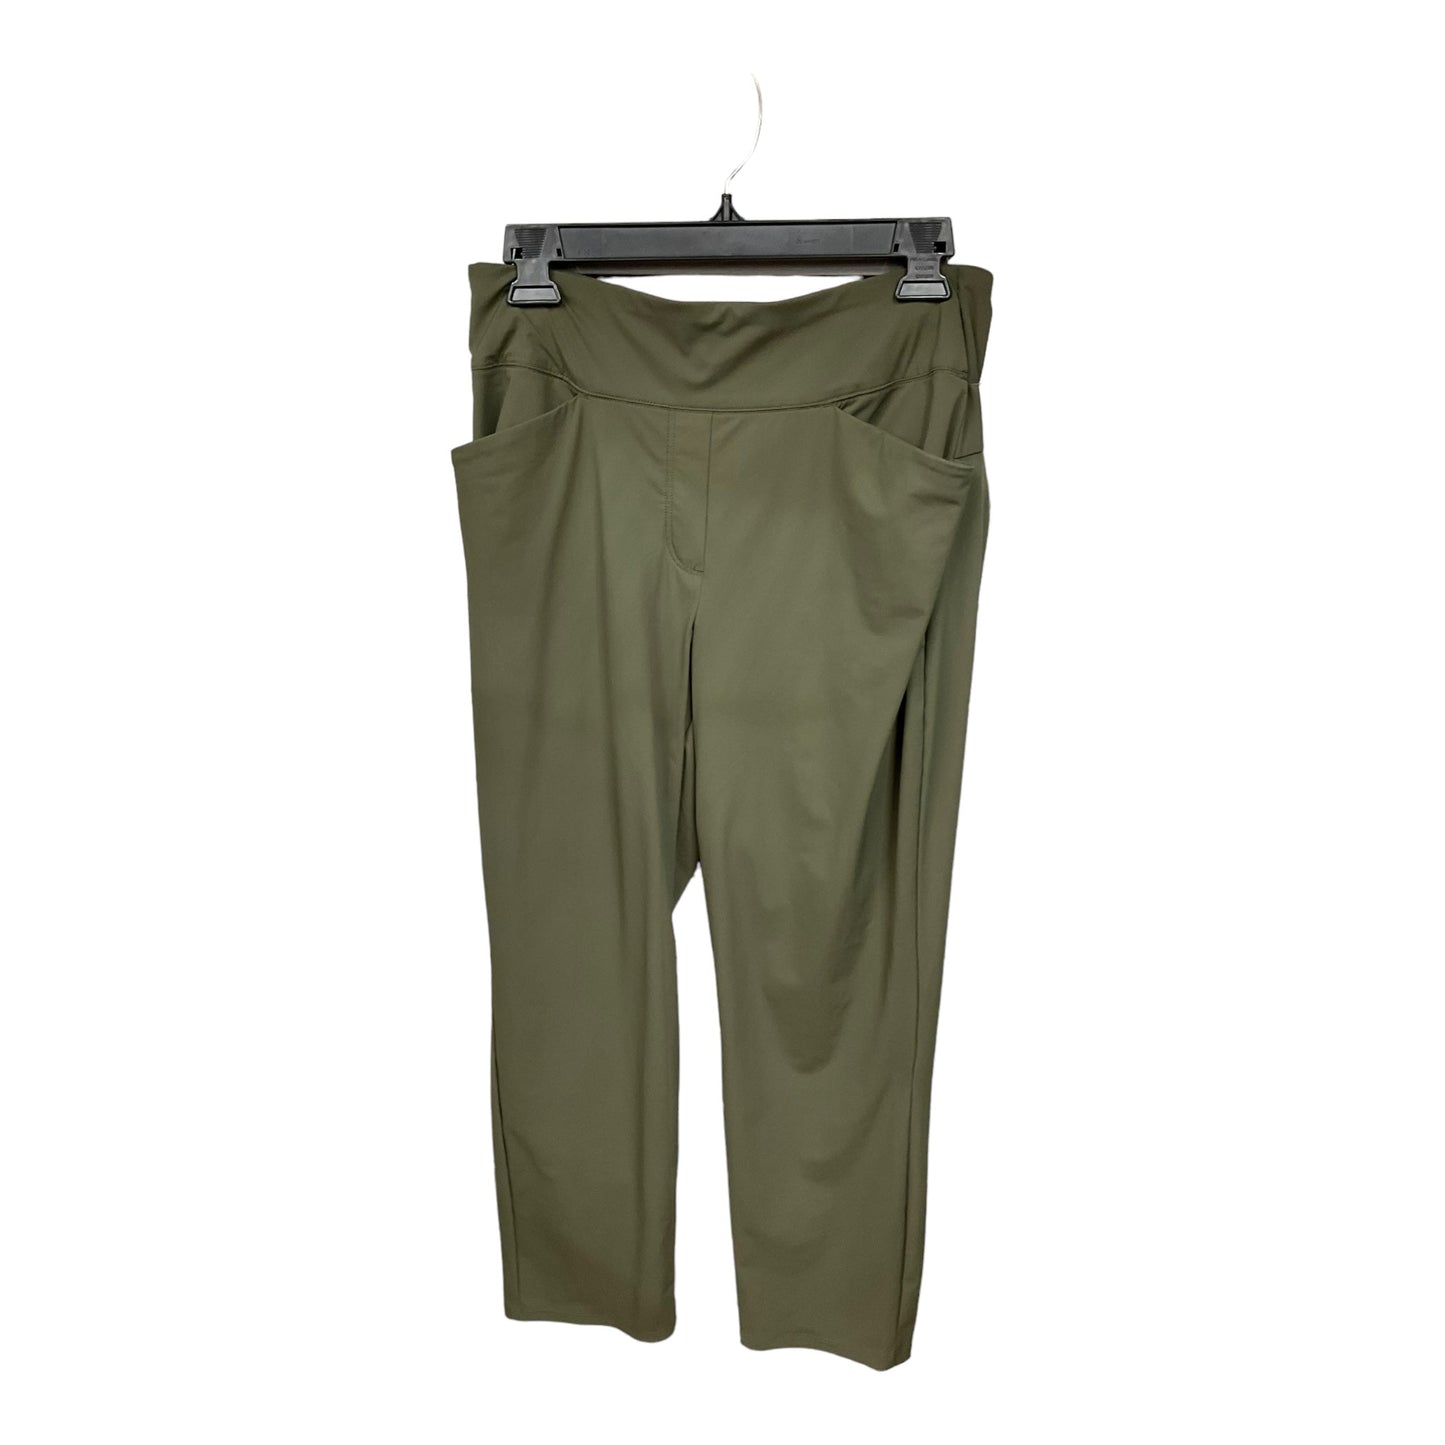 Green Athletic Pants Express, Size M